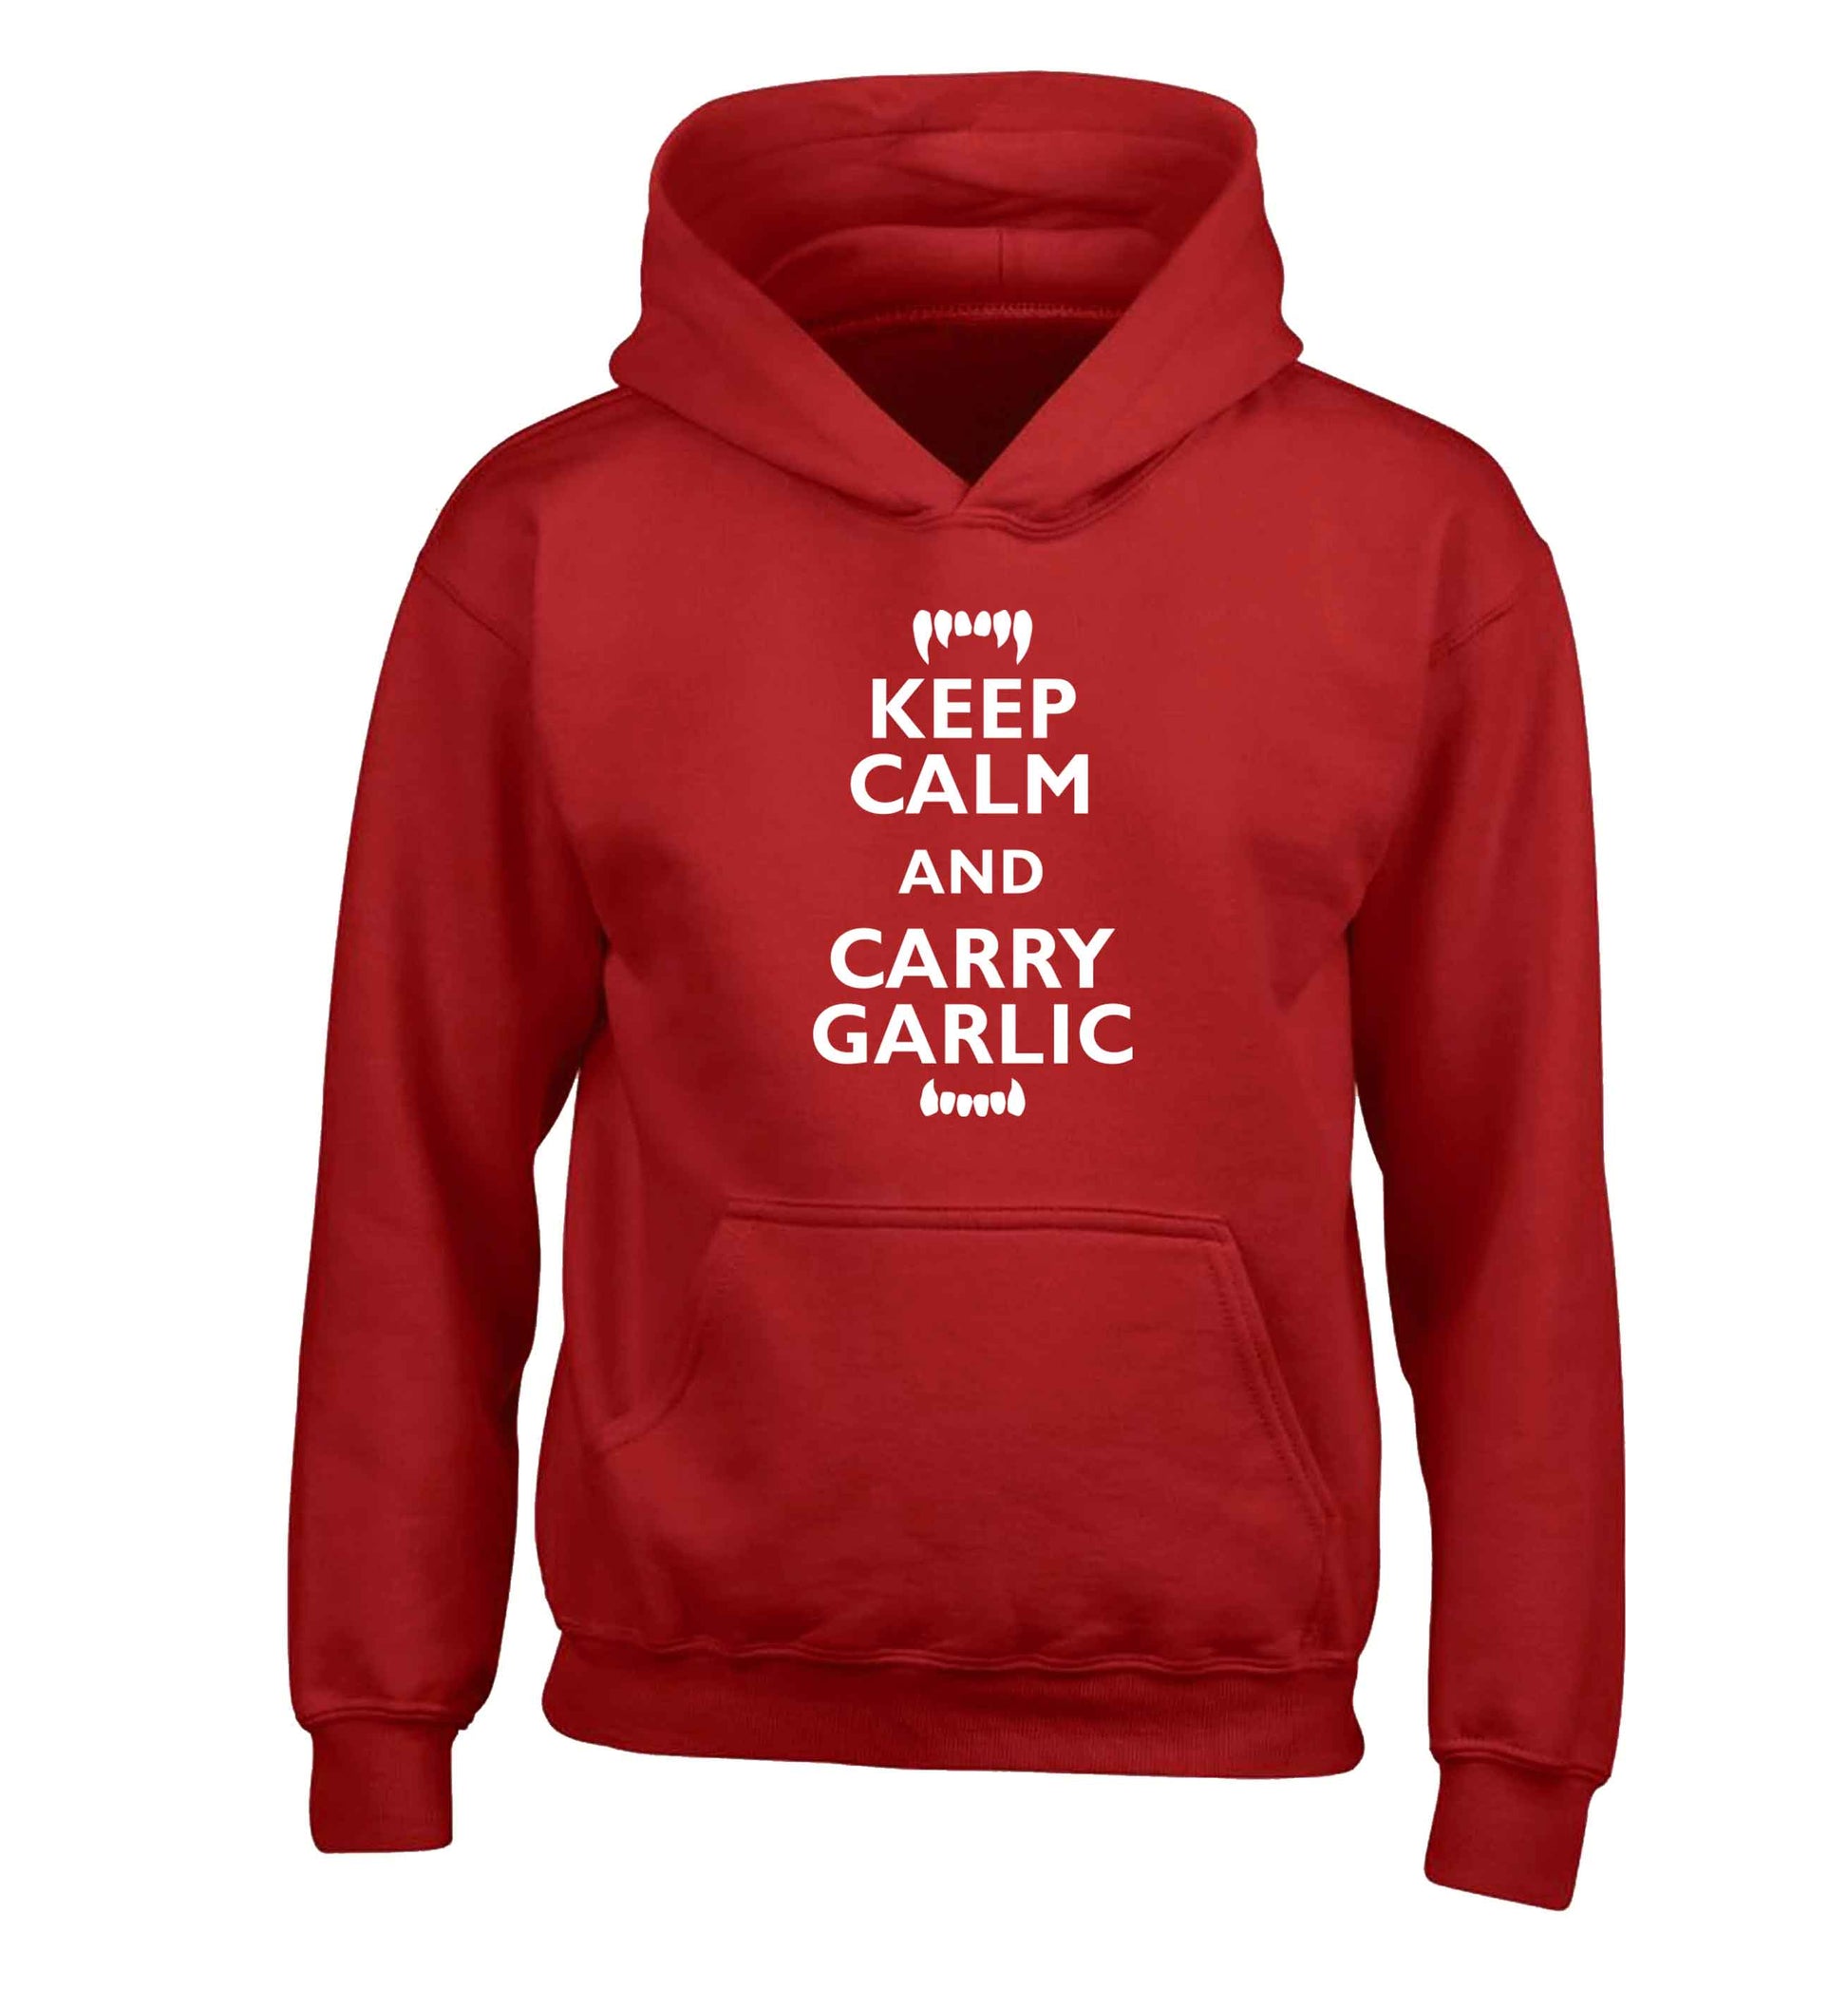 Keep calm and carry garlic children's red hoodie 12-13 Years